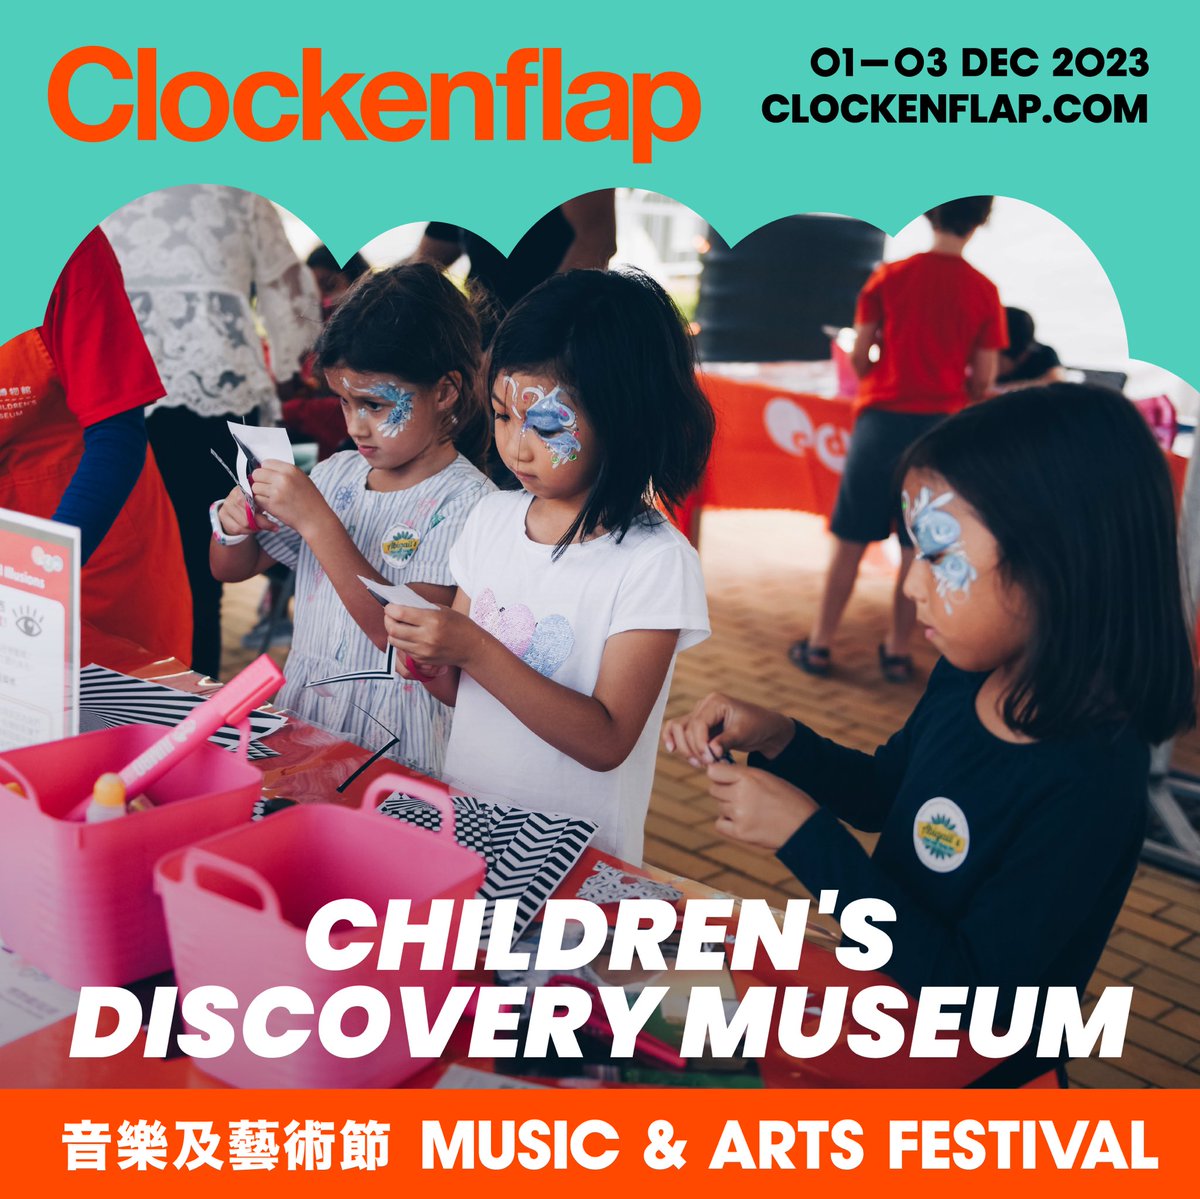 Located in Sai Wan Ho, Children’s Discovery Museum (CDM) is dedicated to providing child-led learning-through-play experiences. Tickets： ticketflap.com/clockenflapdec…